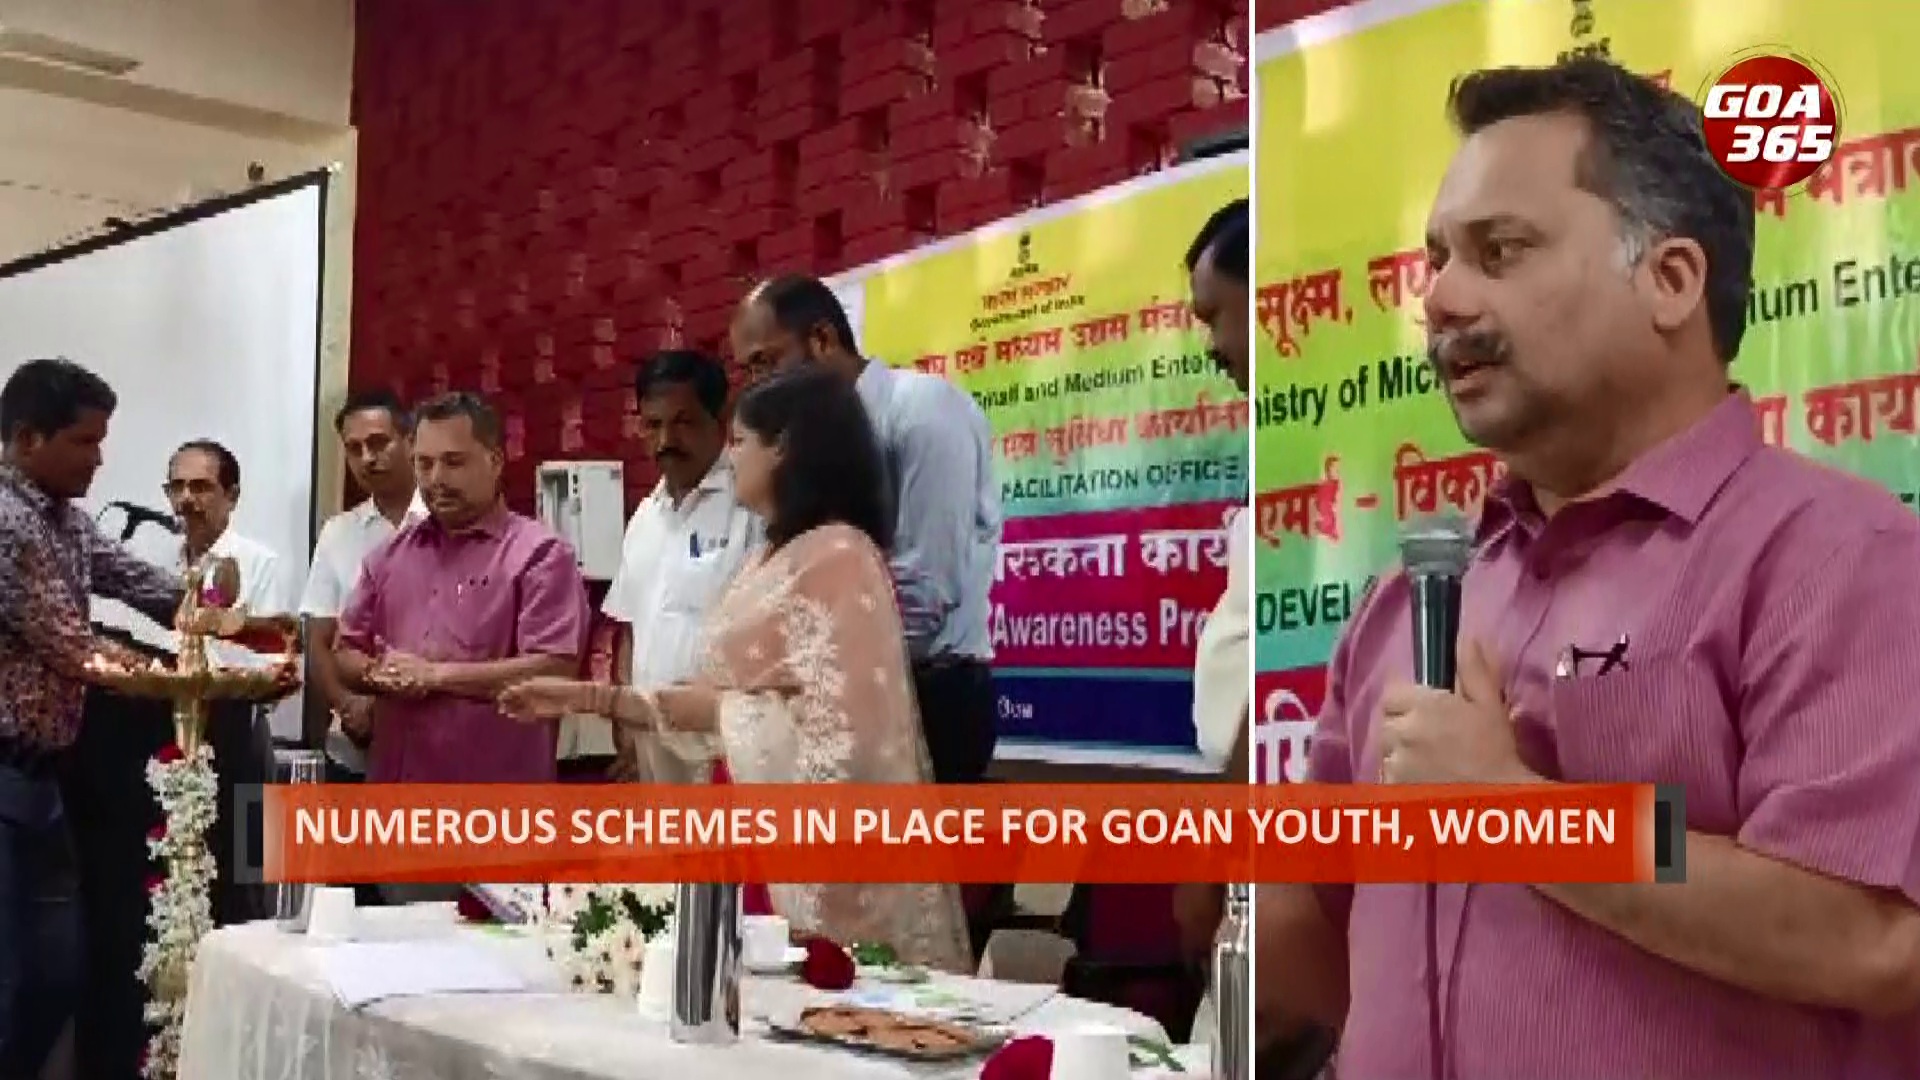 ‘Make use of MSME schemes’, Cabral pushes for goan youth, women to set up businesses 